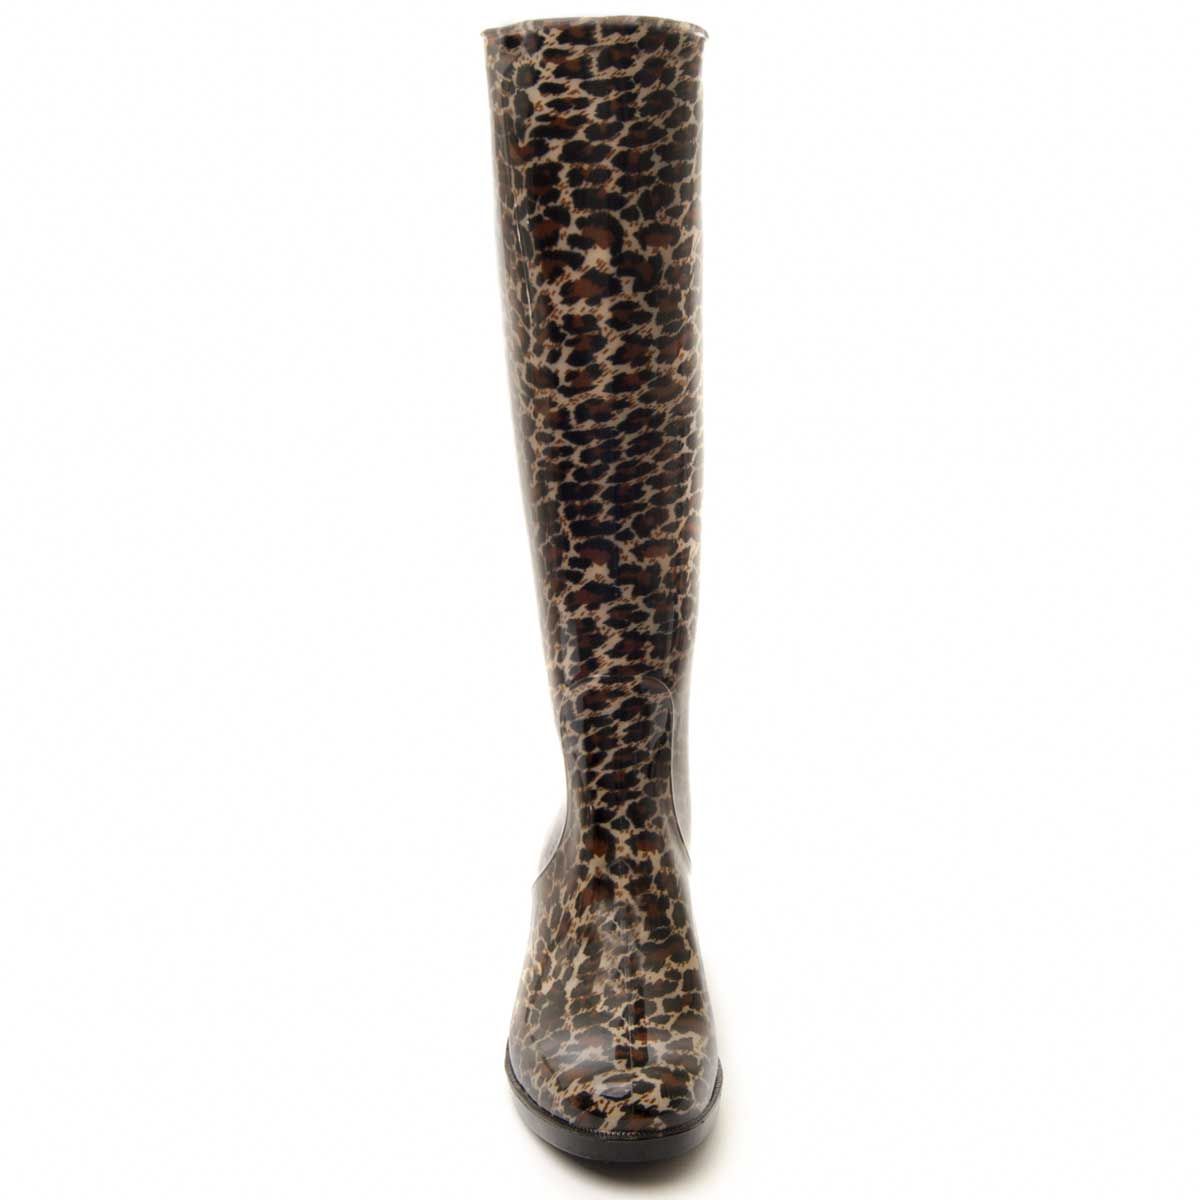 Water boot with heel and high cane with measurements: 37cm * 15cm. Perfect for rainy days as it keeps the feet warm and dry. AnimalPrint Leopard. Both sole and outer lining are one piece so that water does not penetrate. Anti-slip rubber floor. Previous and later reinforcement for durability. Removable padded template.